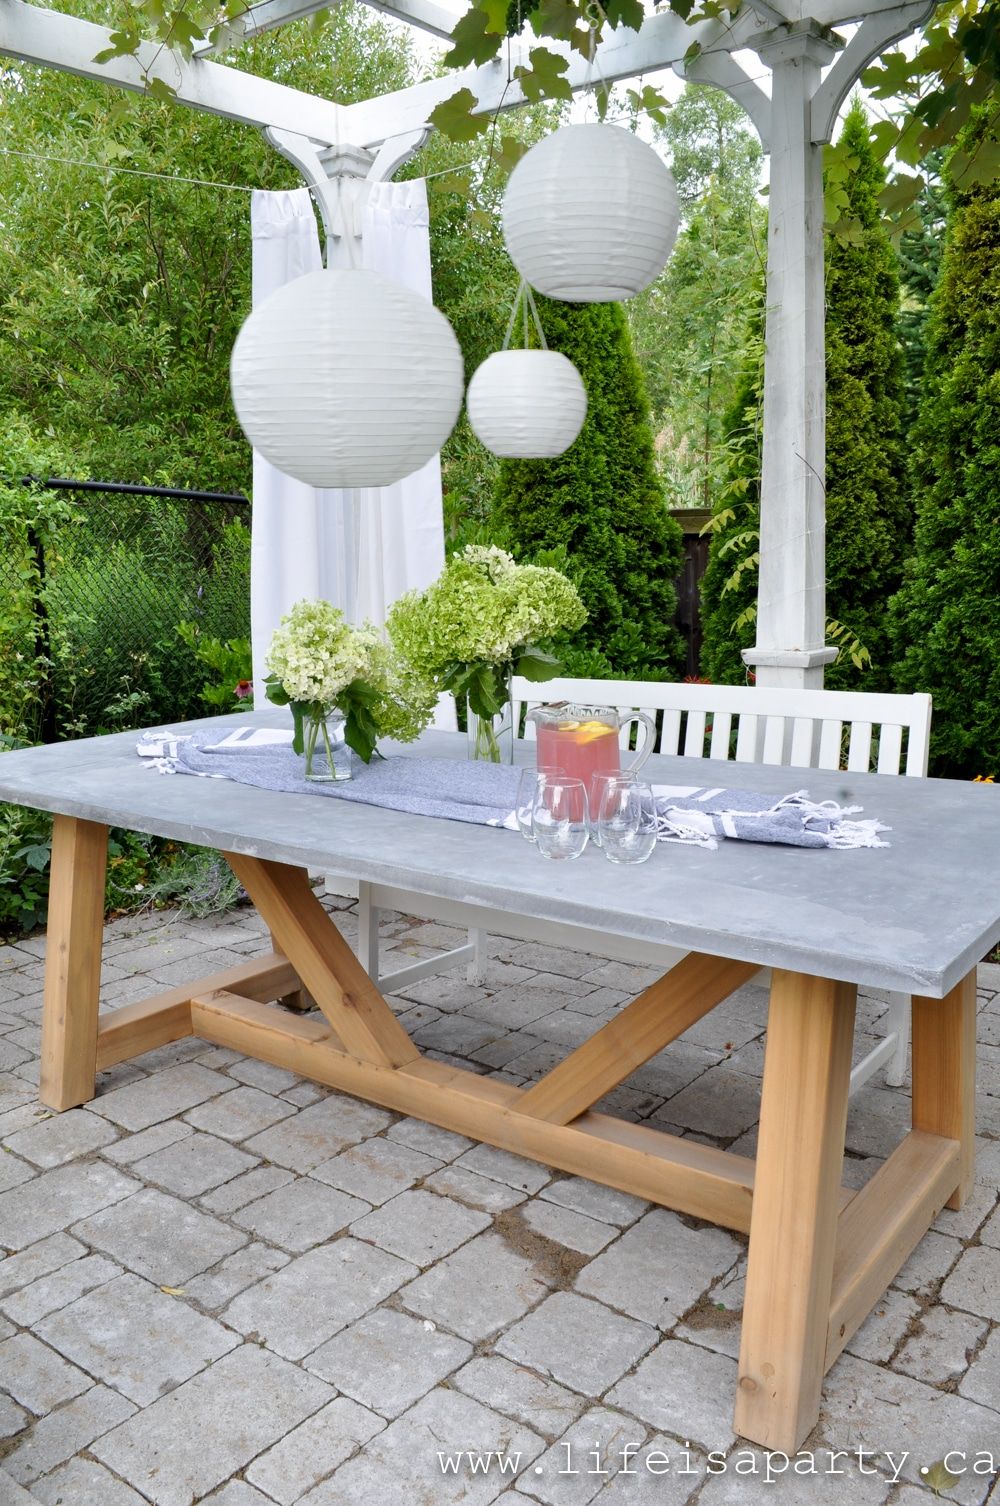 Transform Your Outdoor Spaces with Stylish Patio Table Sets